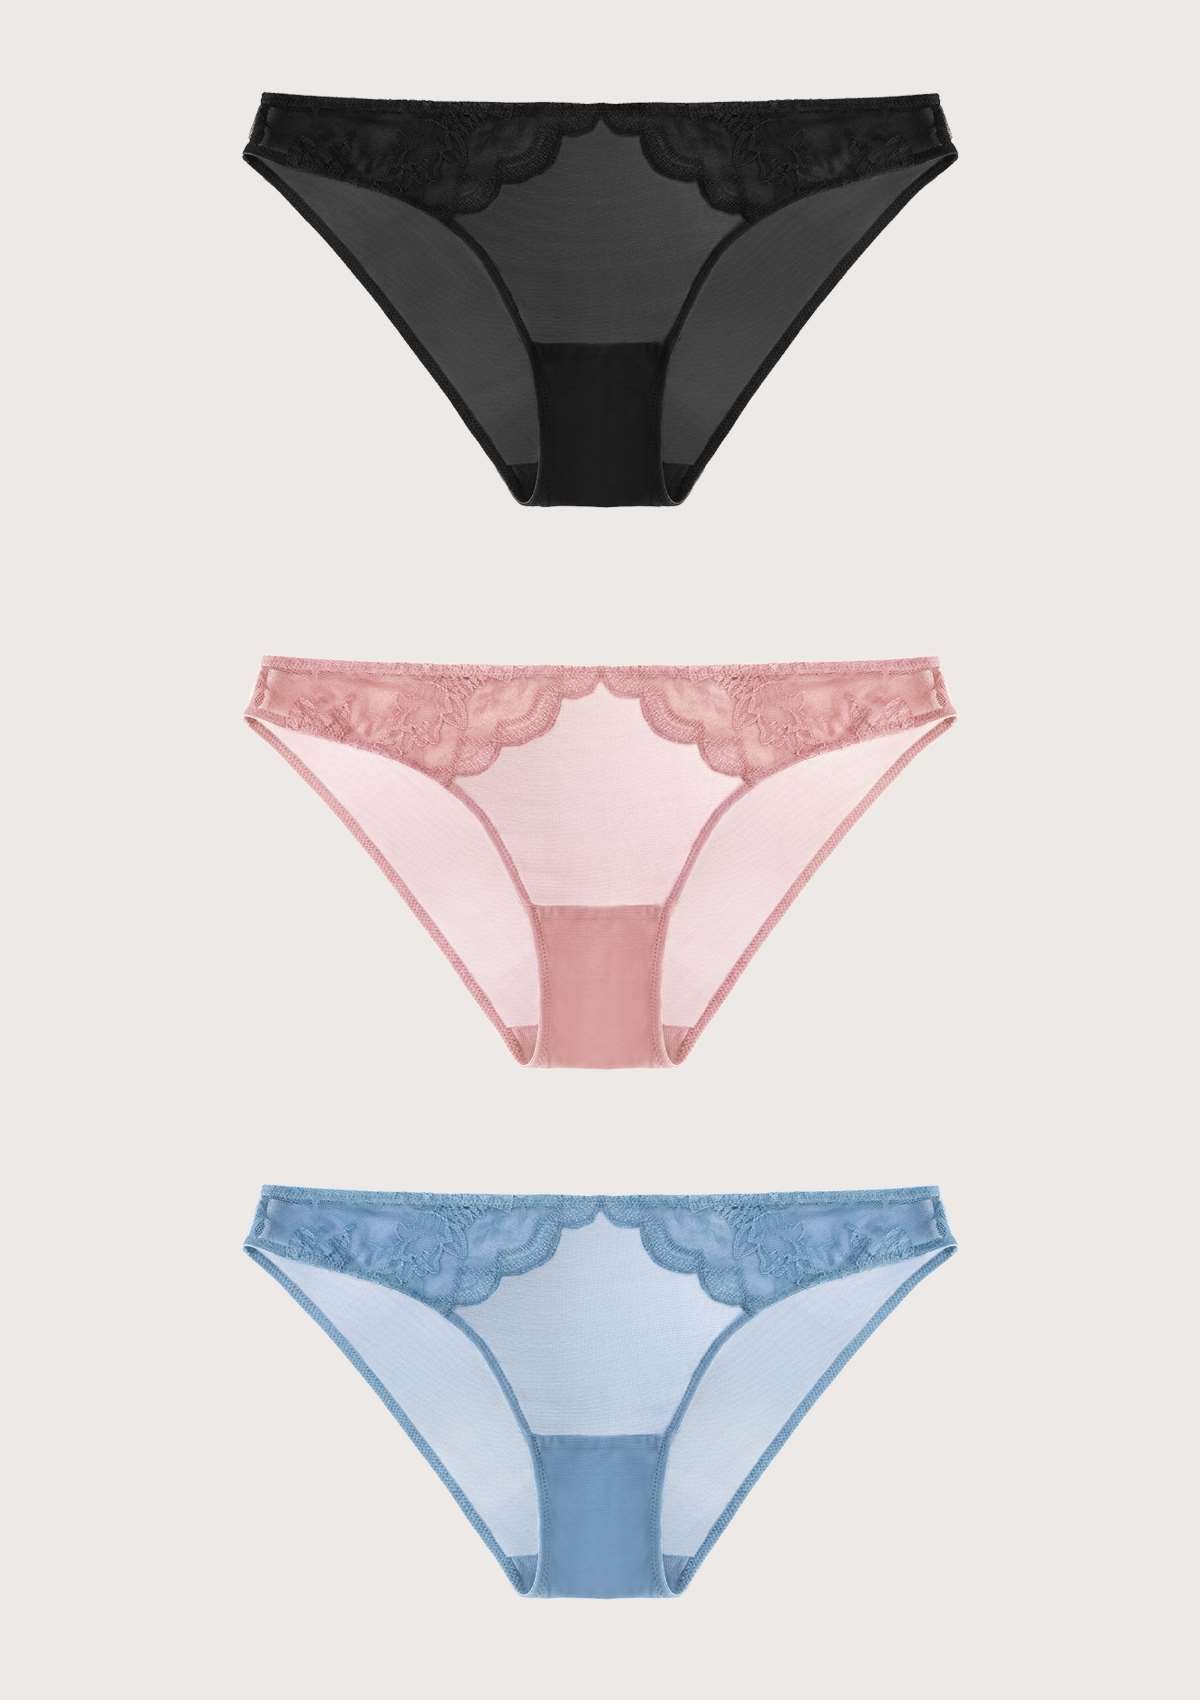 http://www.hsialife.com/cdn/shop/products/fpc0106bbps-hsia-hsia-sexy-lace-bikini-underwears-3-pack-s-black-pink-blue-38896669458681.jpg?v=1680841574